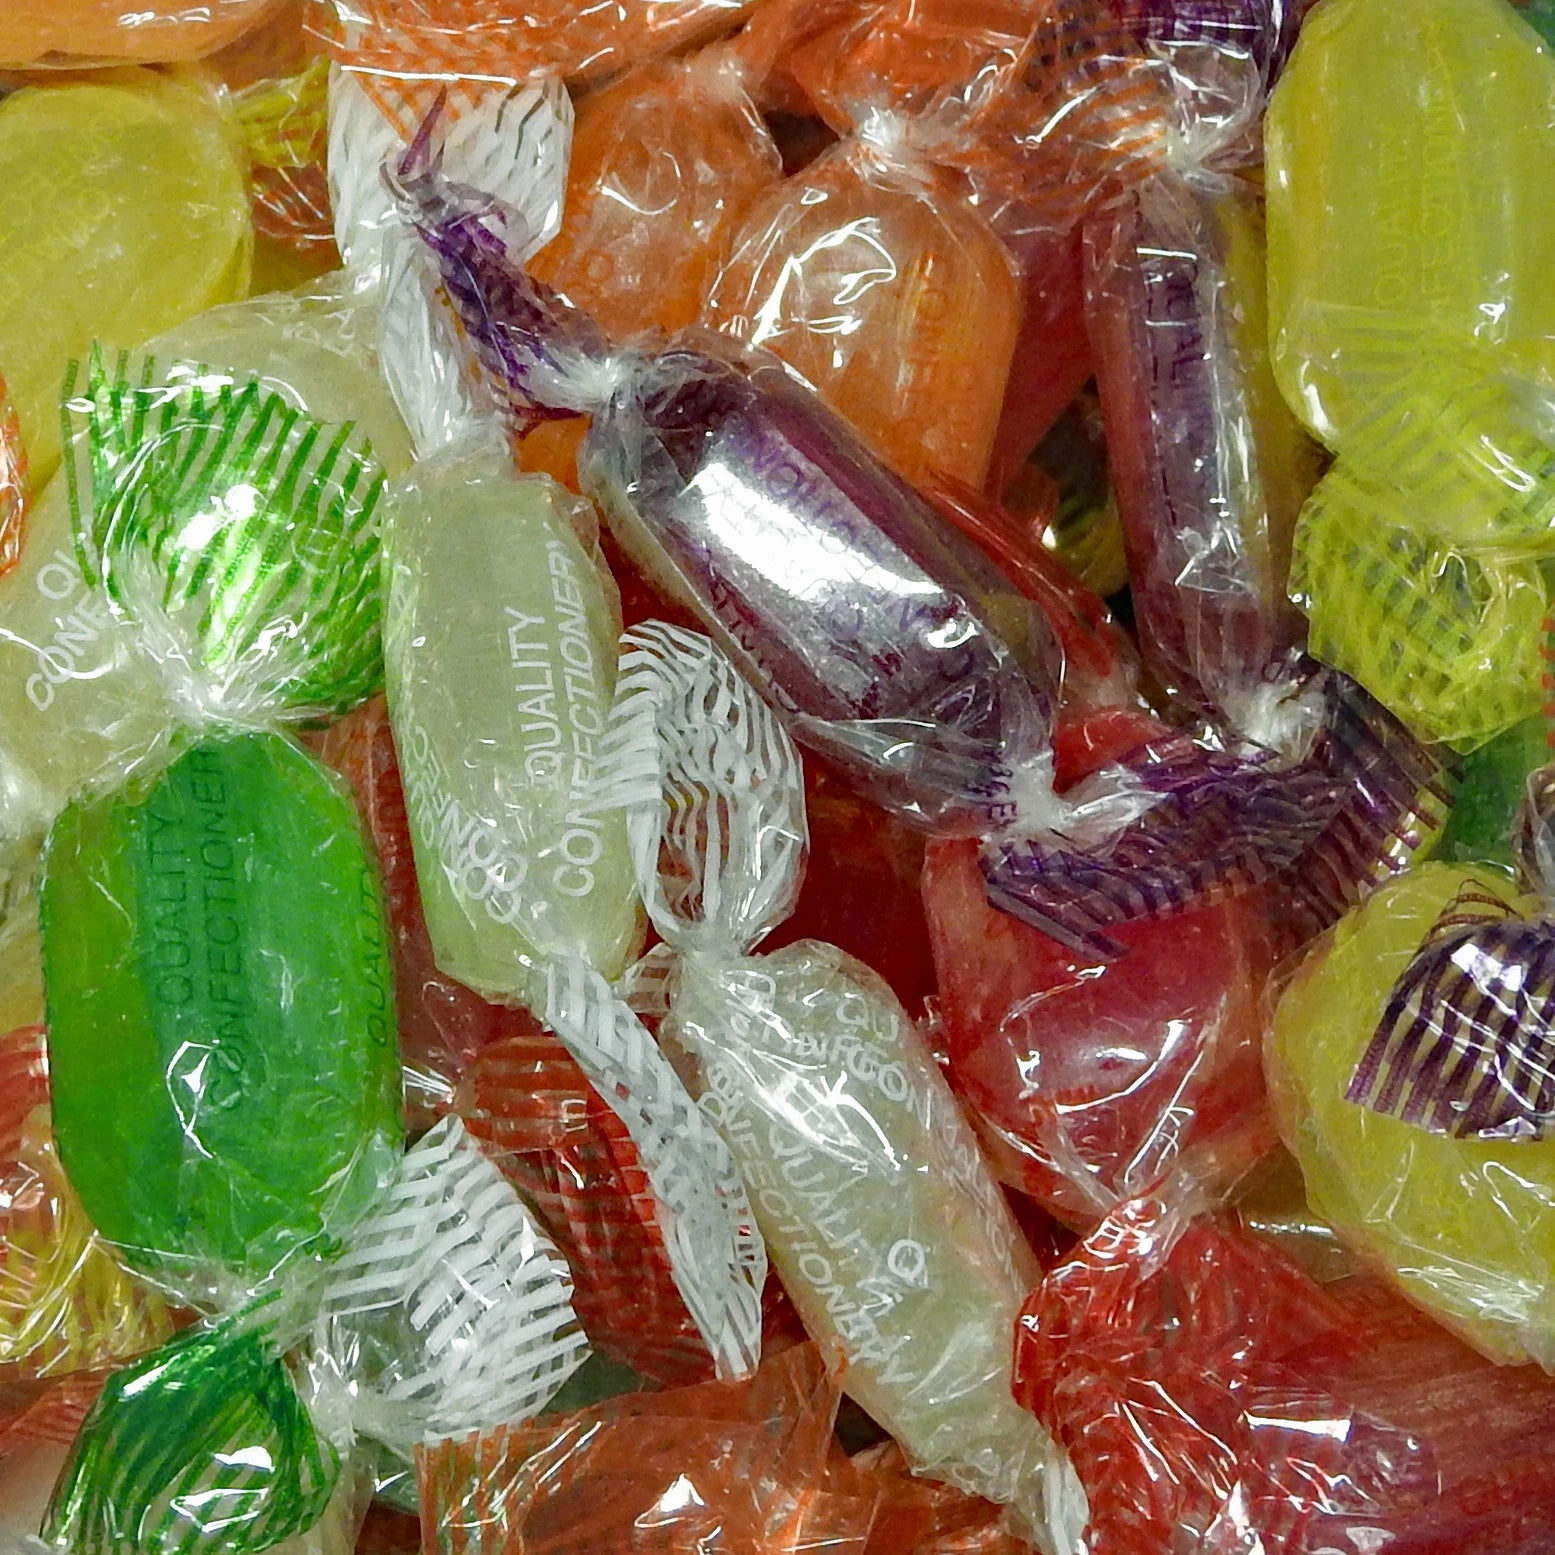 Stockley's Fruit Drops - Retro Sweets at The Sweetie Jar